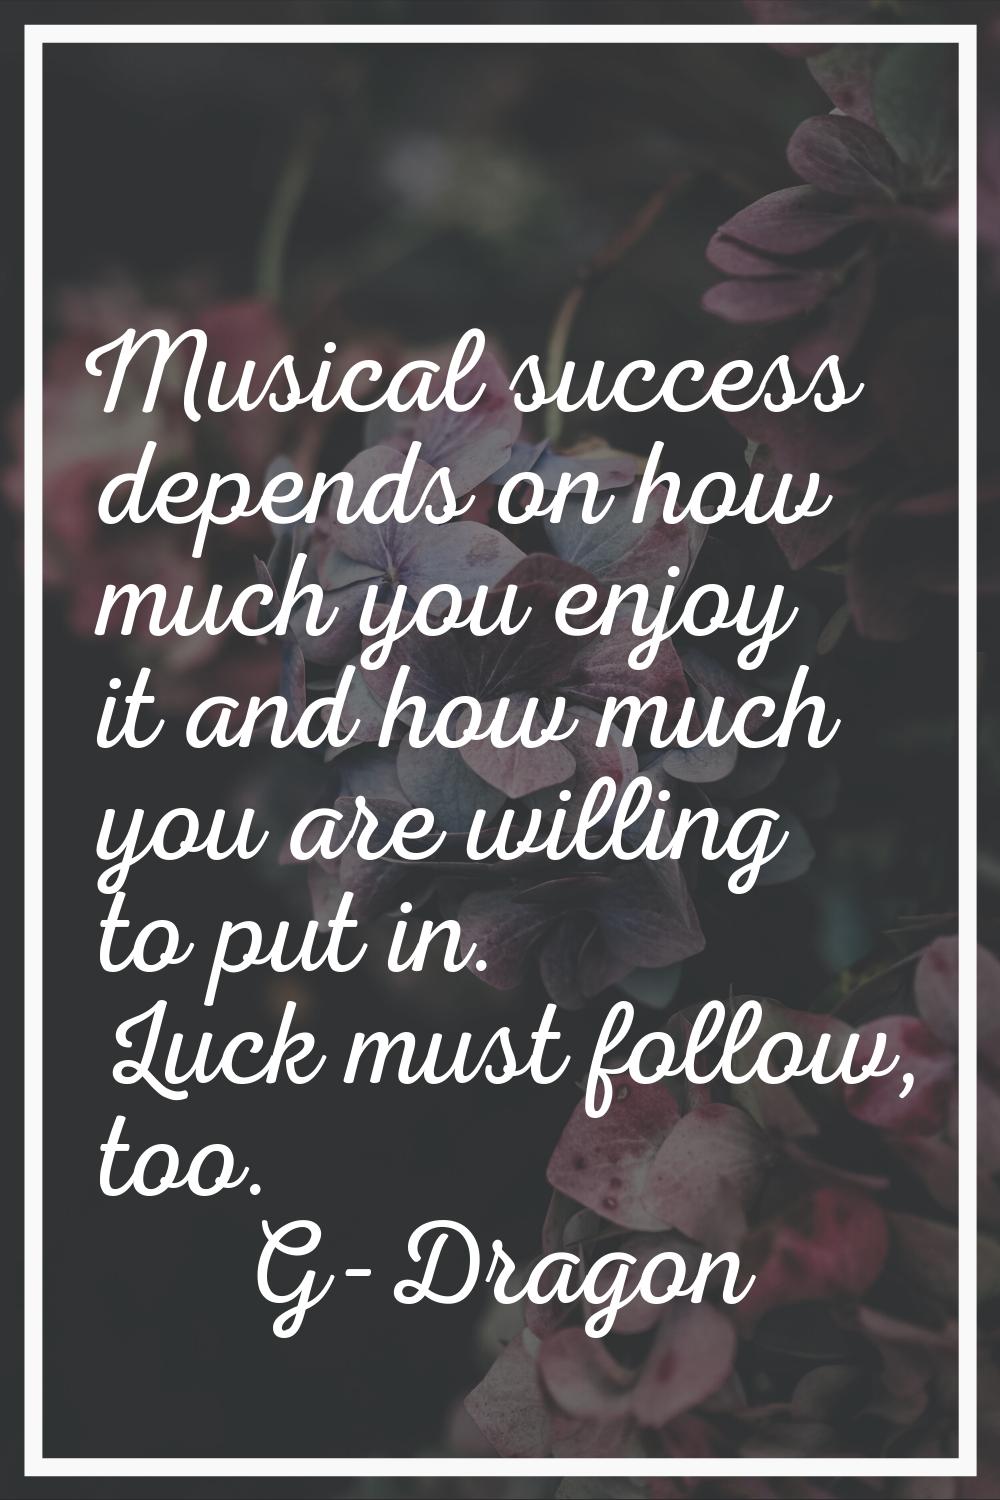 Musical success depends on how much you enjoy it and how much you are willing to put in. Luck must 